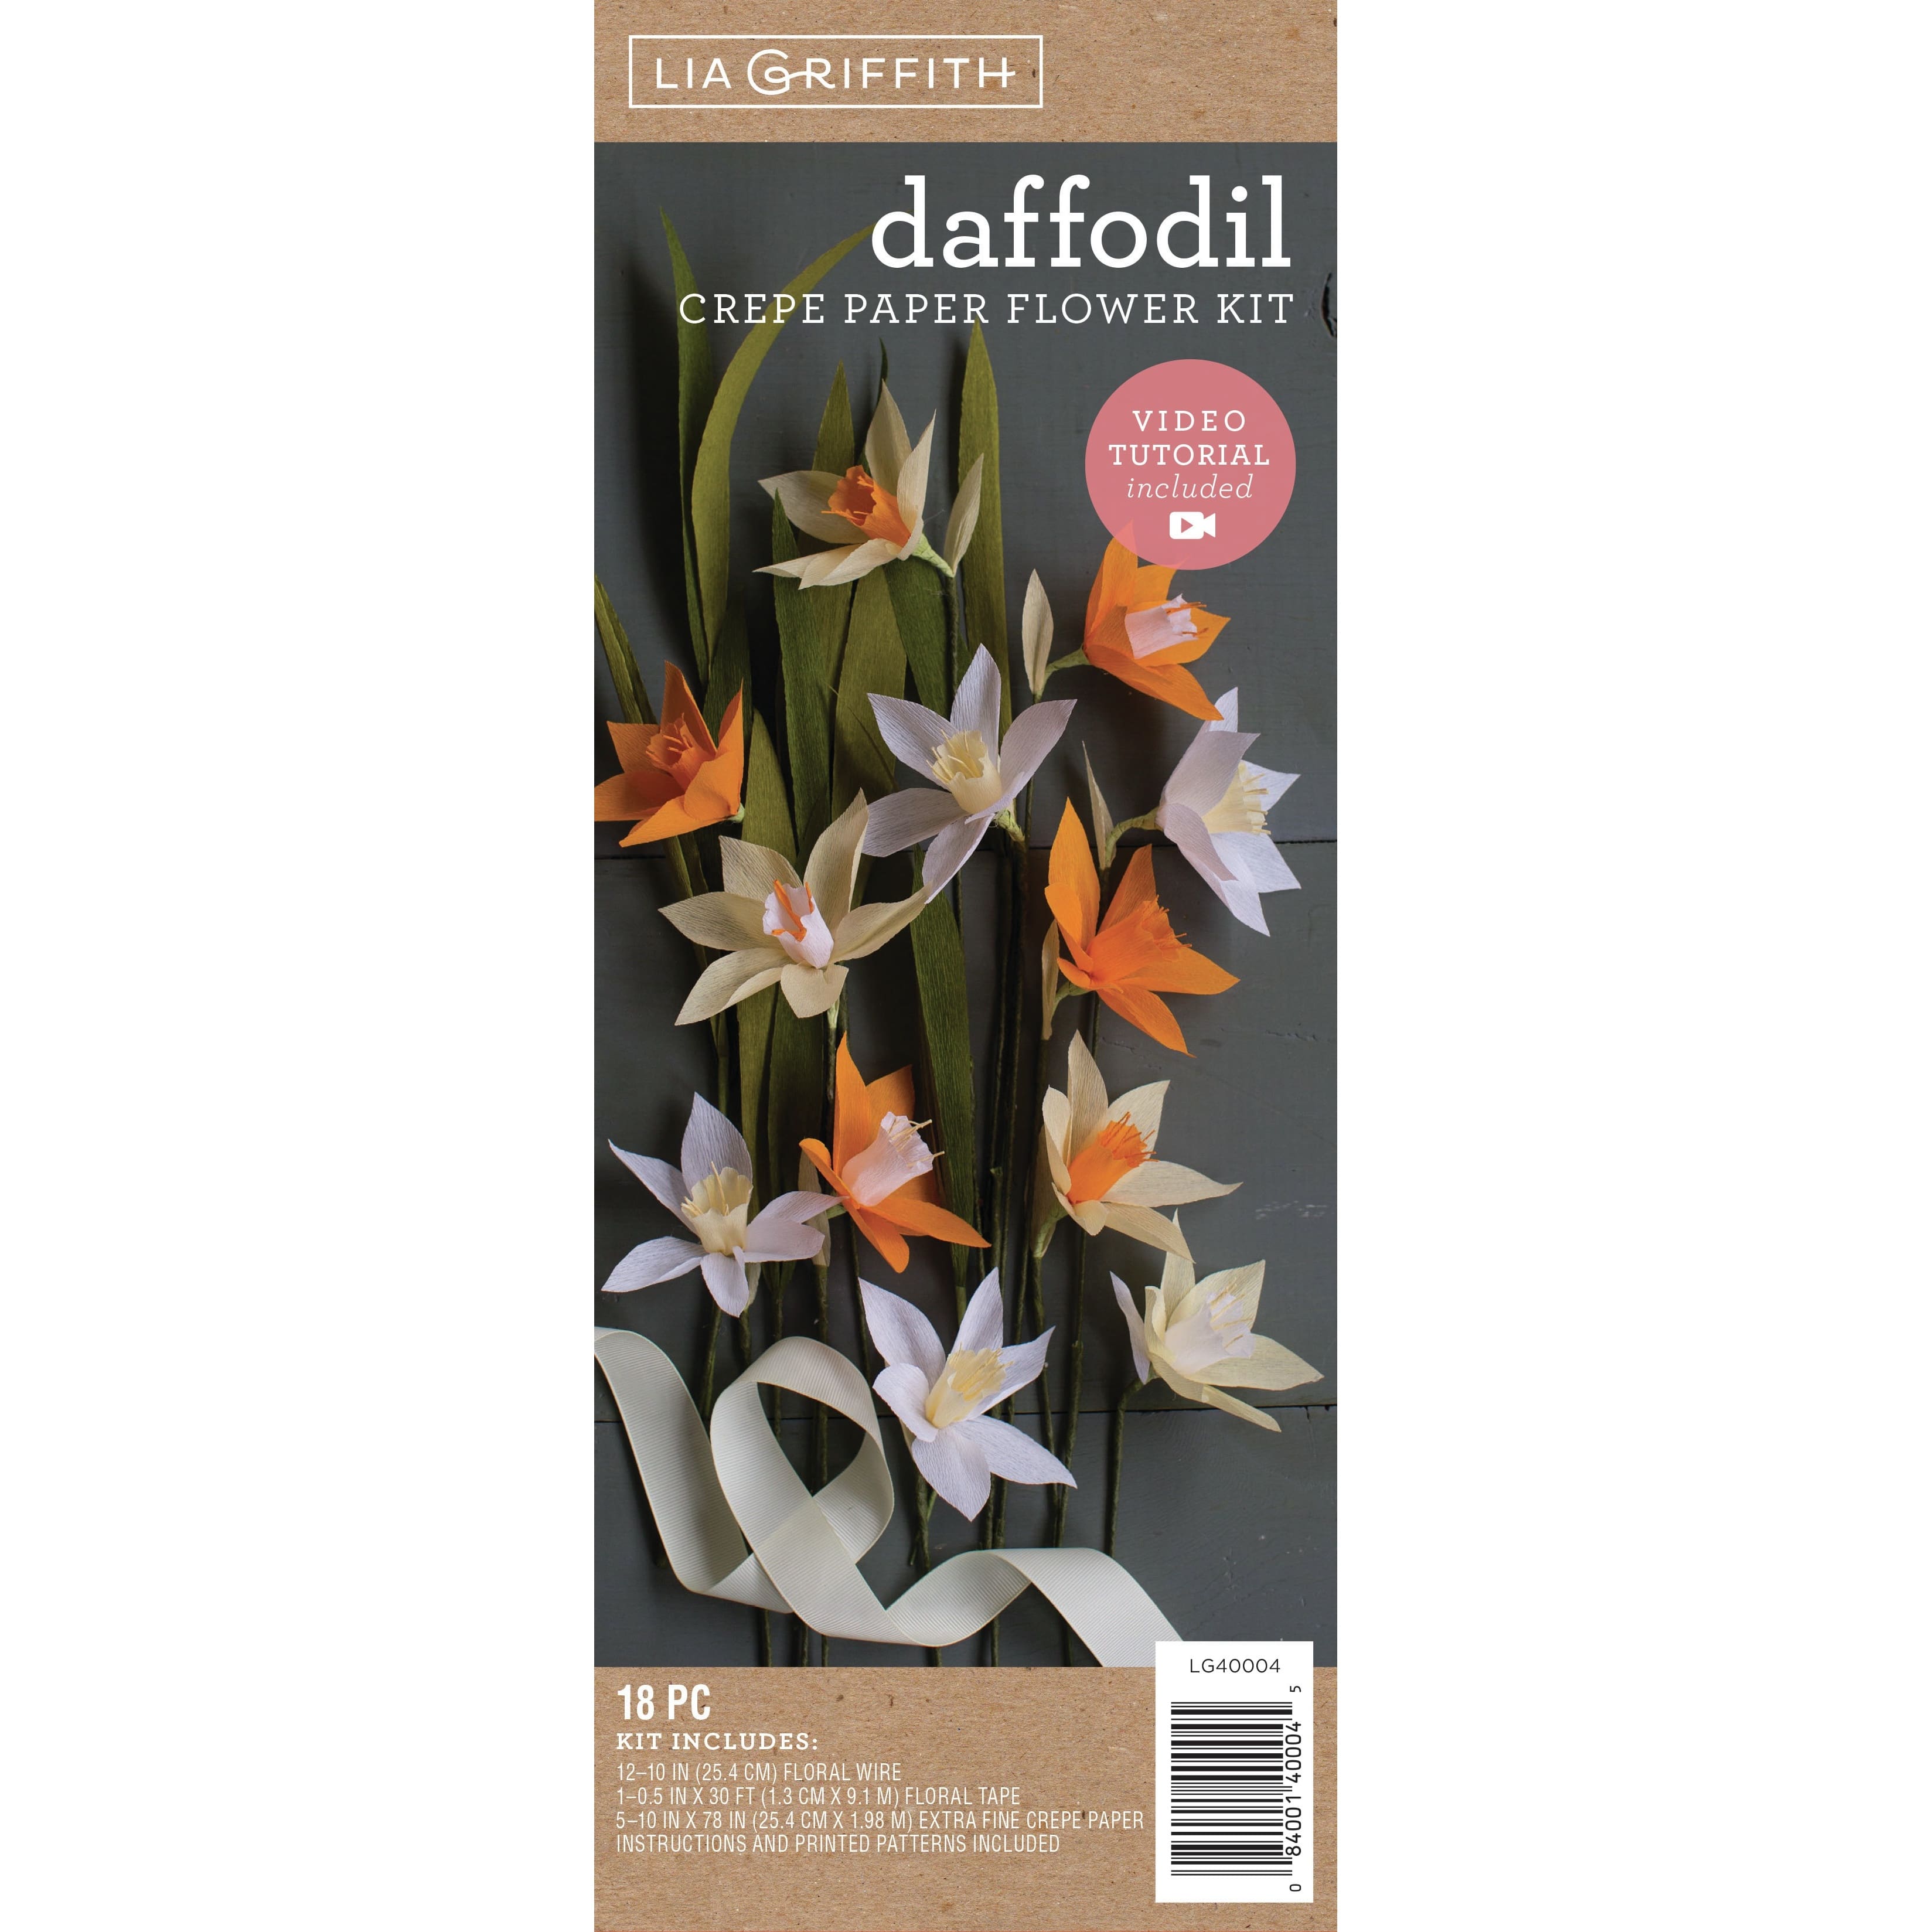 Lia Griffith Daffodil Crepe Paper Flower Kit